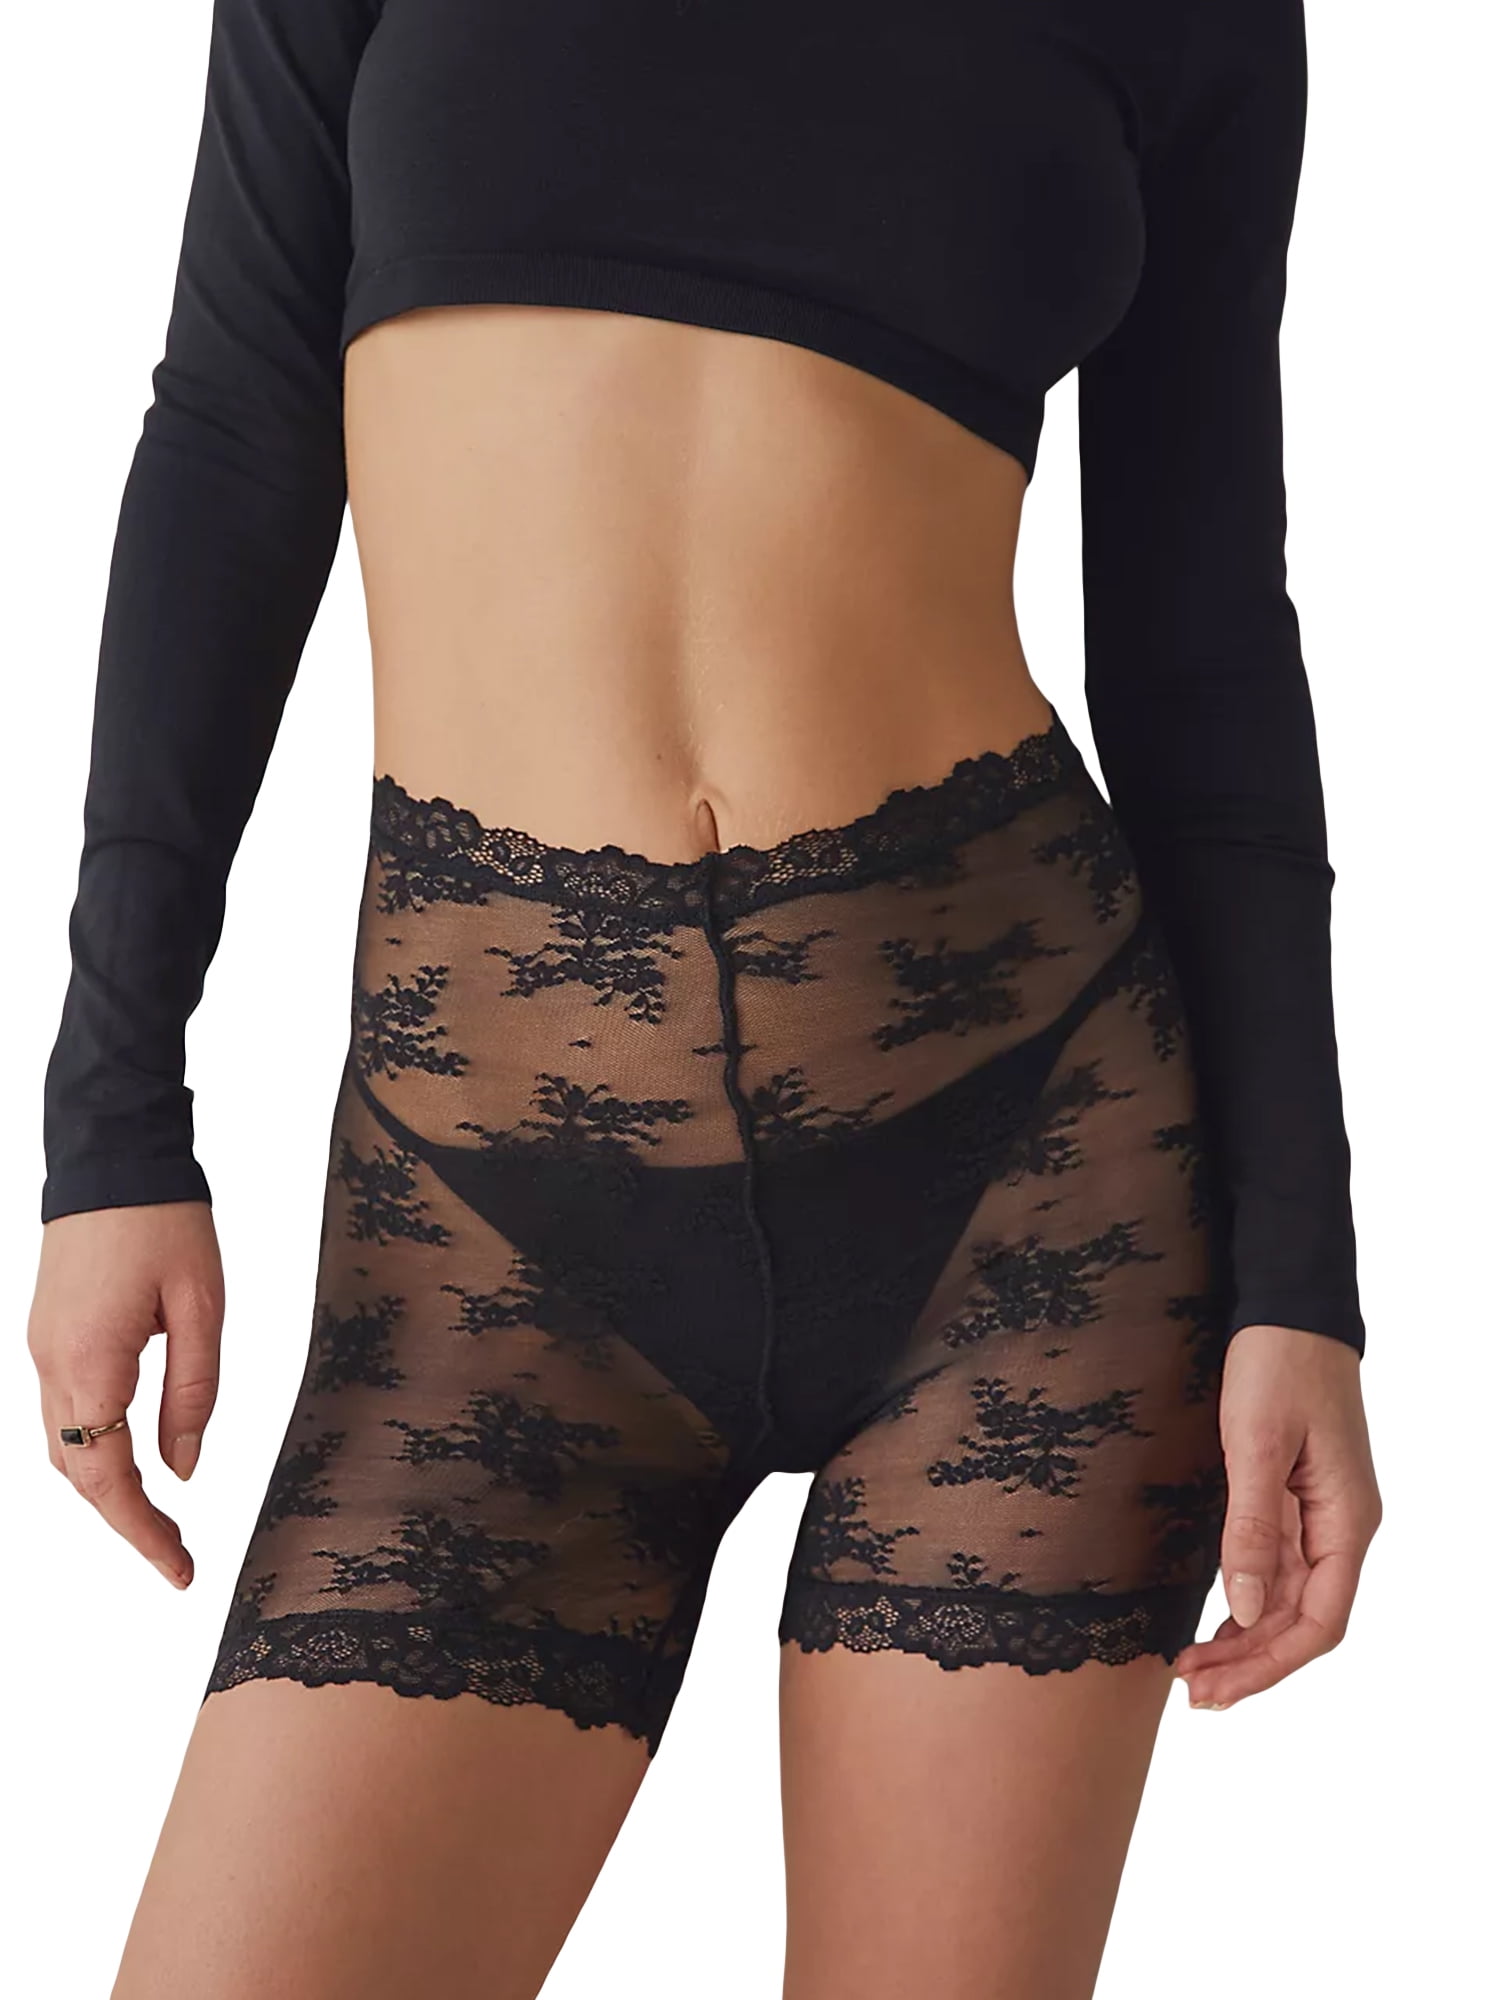 Women's Sheer Lace Shorts, Summer Super Thin Breathable High Waist  Anti-Chafing Panty Shorts 